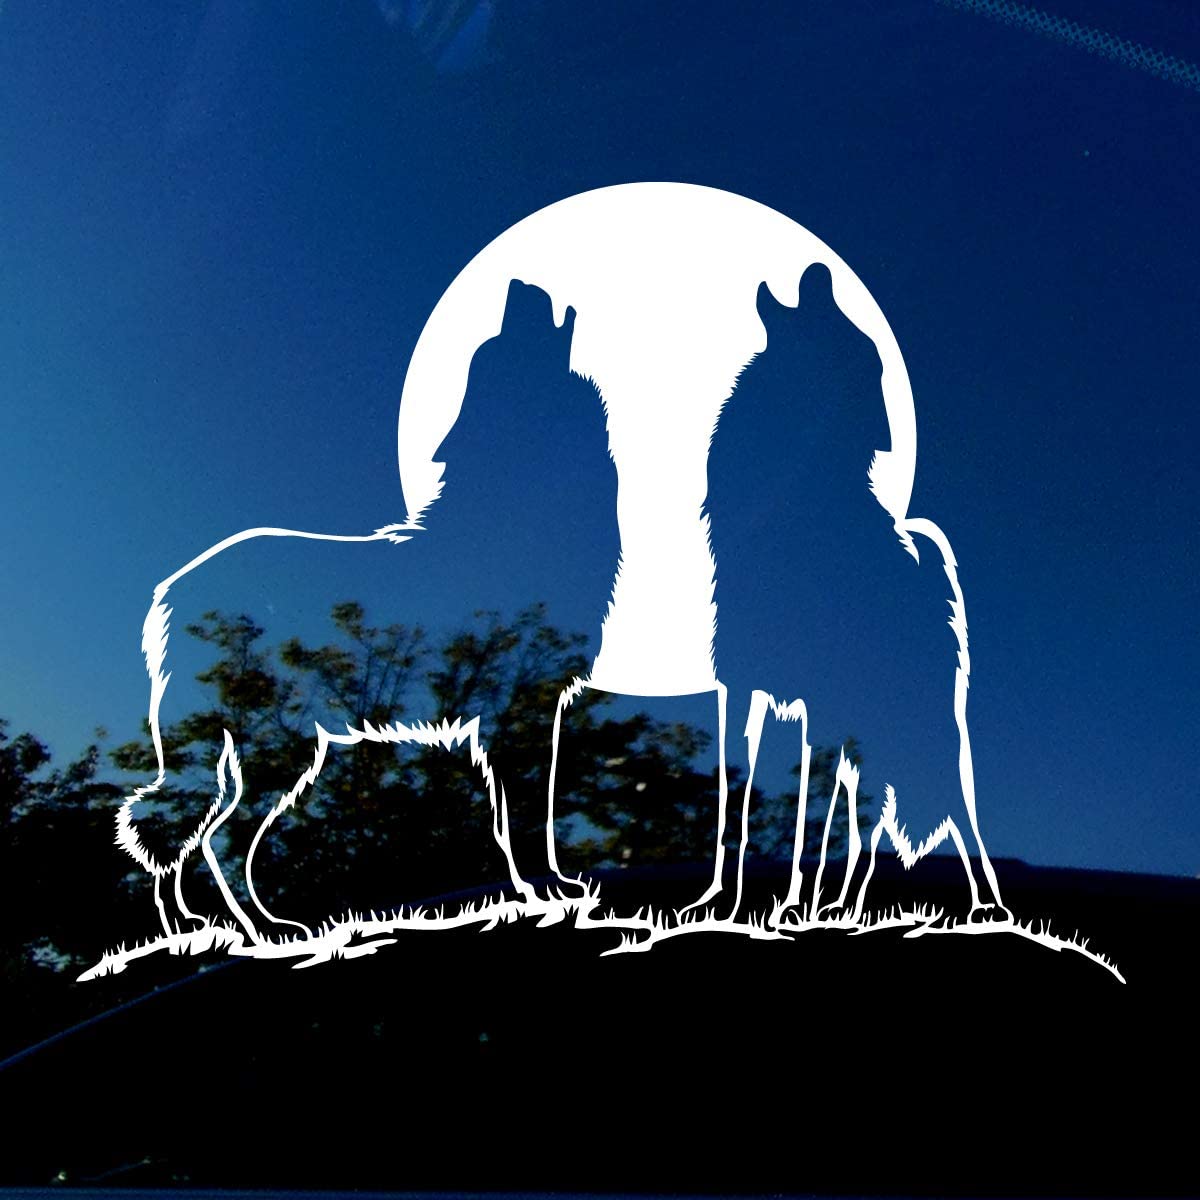 Howling Wolf Decal Sticker- White - X Large 9.5 x 7.2 inches - Wolves  Howling at The Moon - Indoor/Outdoor Vinyl for Car Window Truck Wall Laptop  Wall